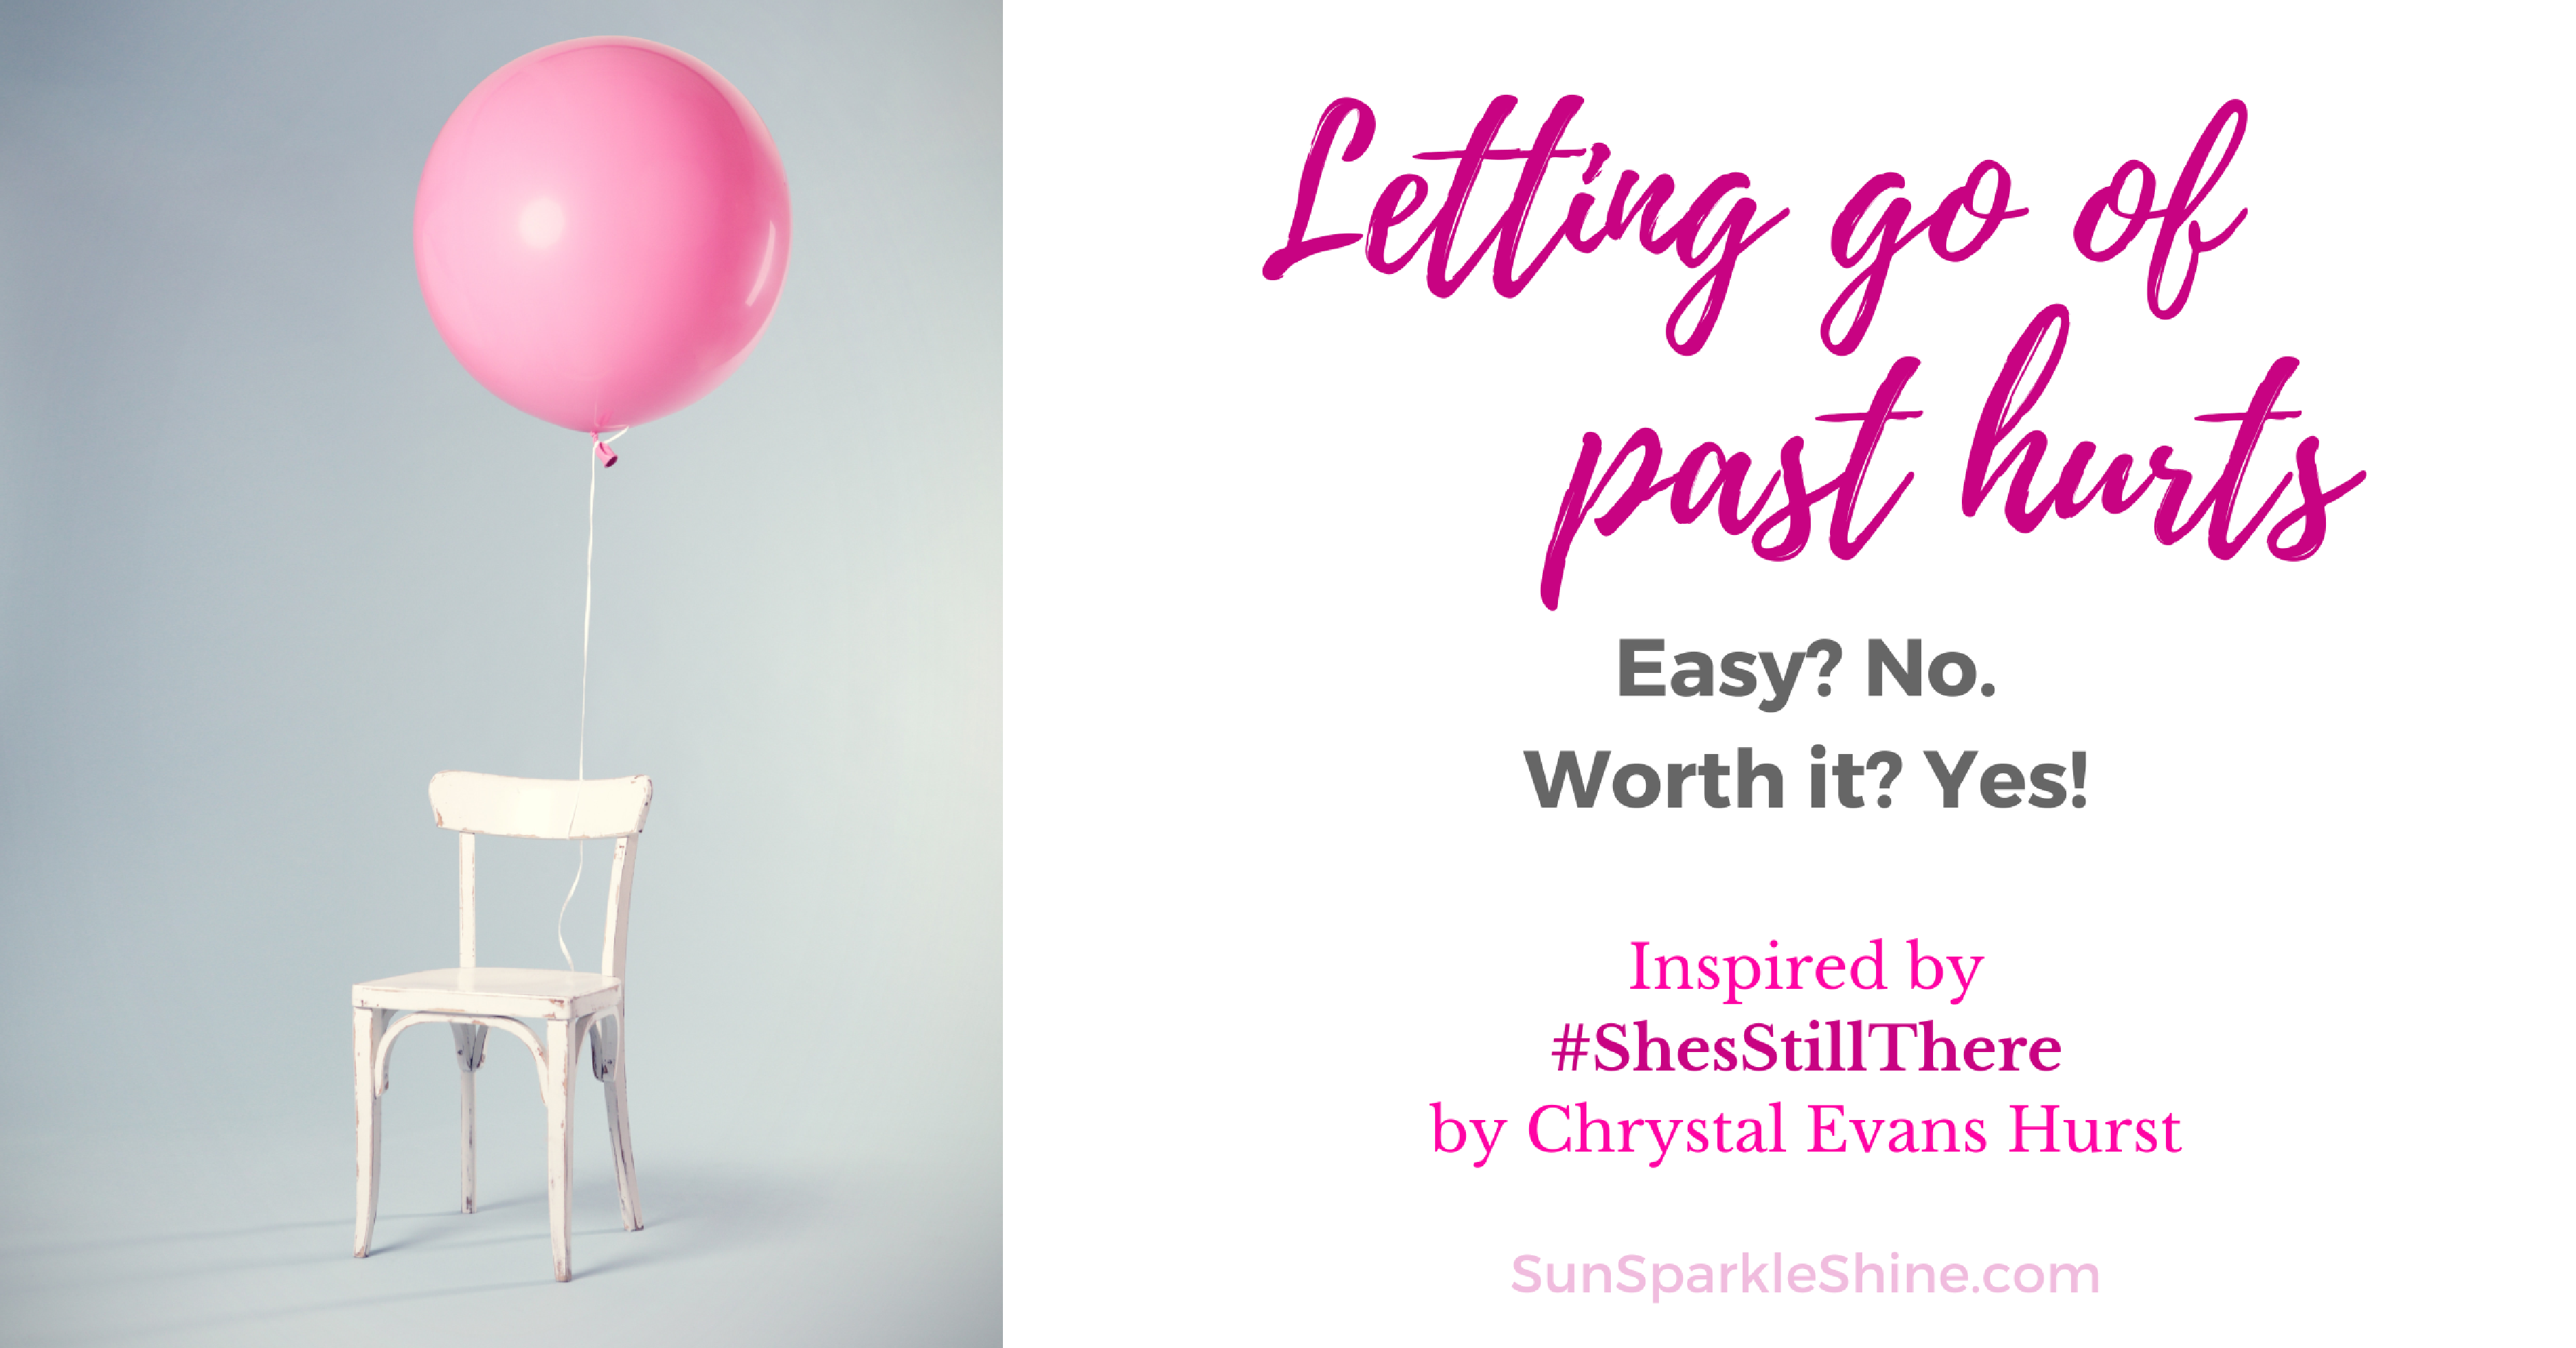 Letting go is often hard to do until we experience the possibilities that lie in moving forward. Inspired by She's Still There, Chrystal Evans Hurst